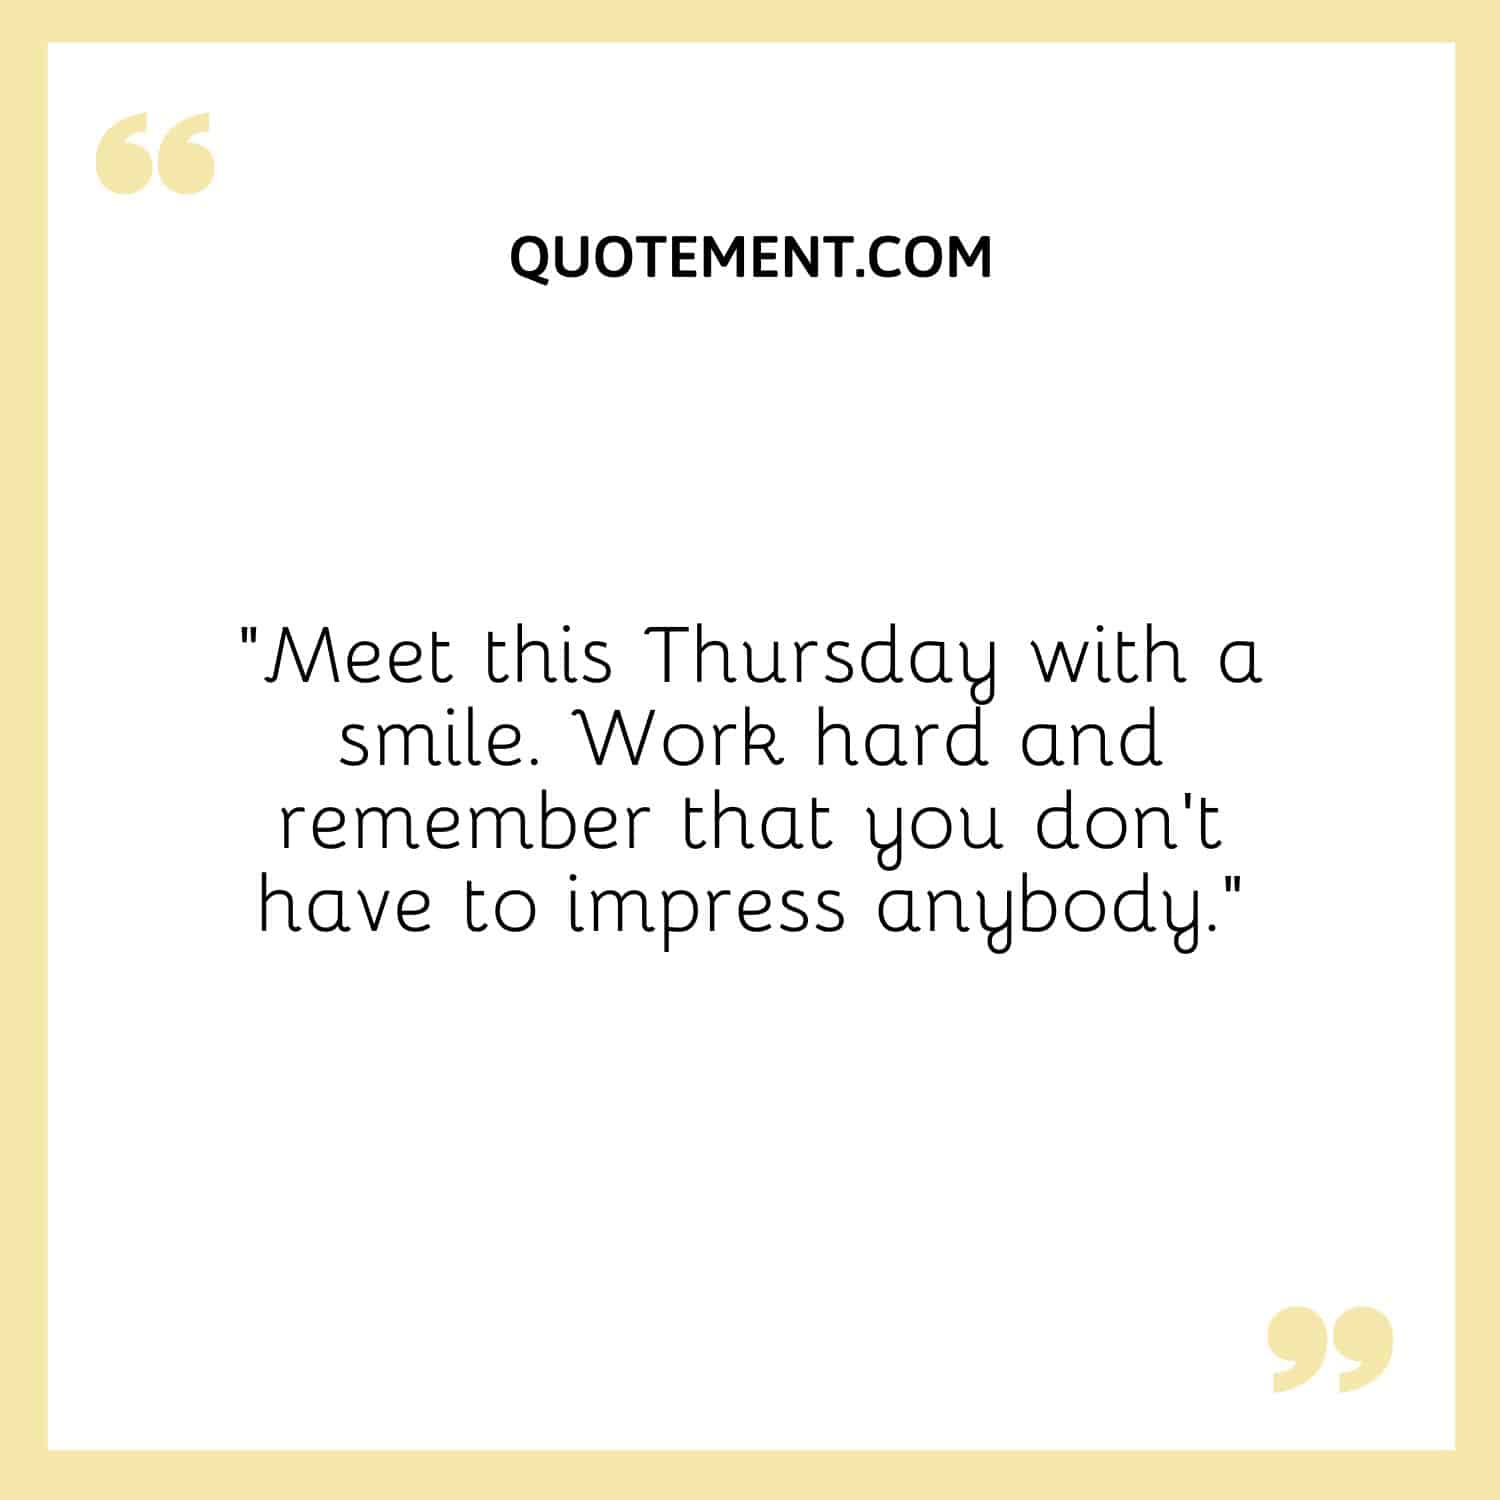 “Meet this Thursday with a smile. Work hard and remember that you don’t have to impress anybody.”